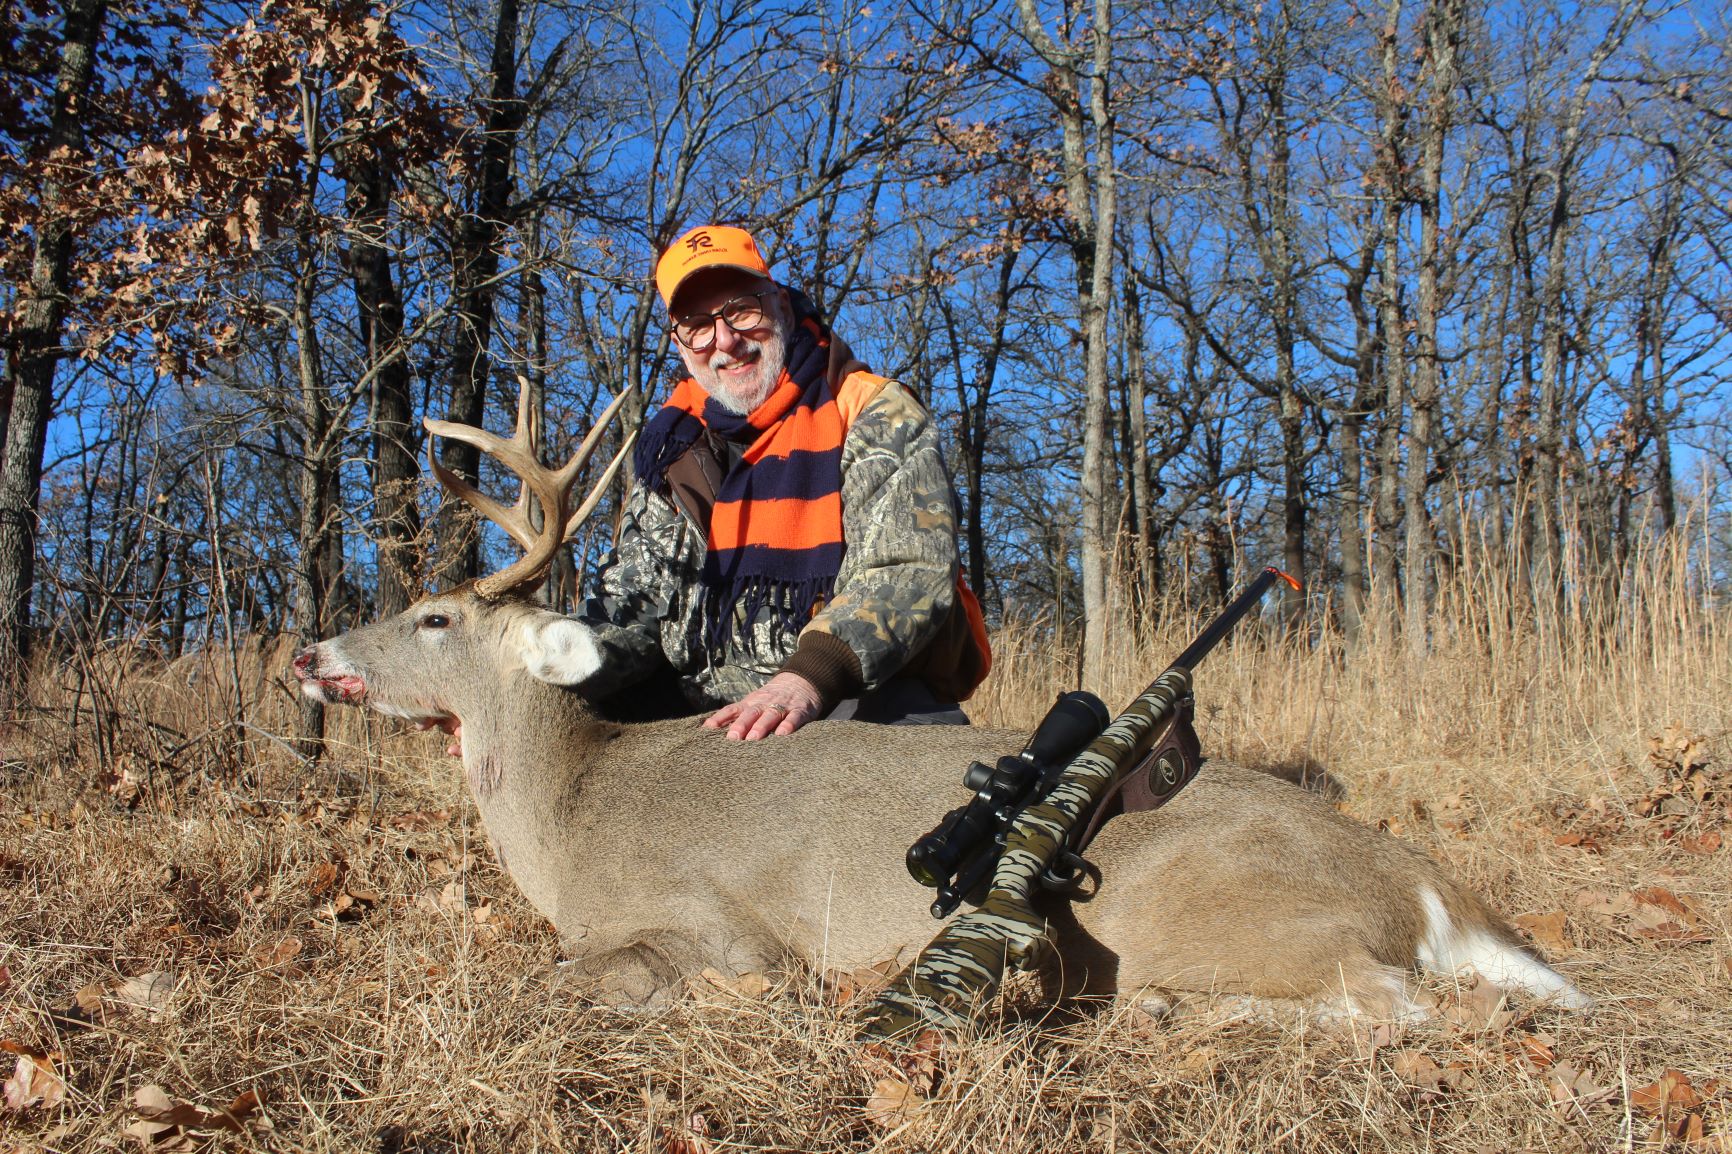 My friend Ron Silverman is a staunch .308 guy. A careful and picky shooter, Ron loves accuracy and chooses the .308. It is probably needlessly powerful for deer-sized game, but it performs with decisive results. This 2019 Kansas buck was downed in its tracks with a single Berger bullet